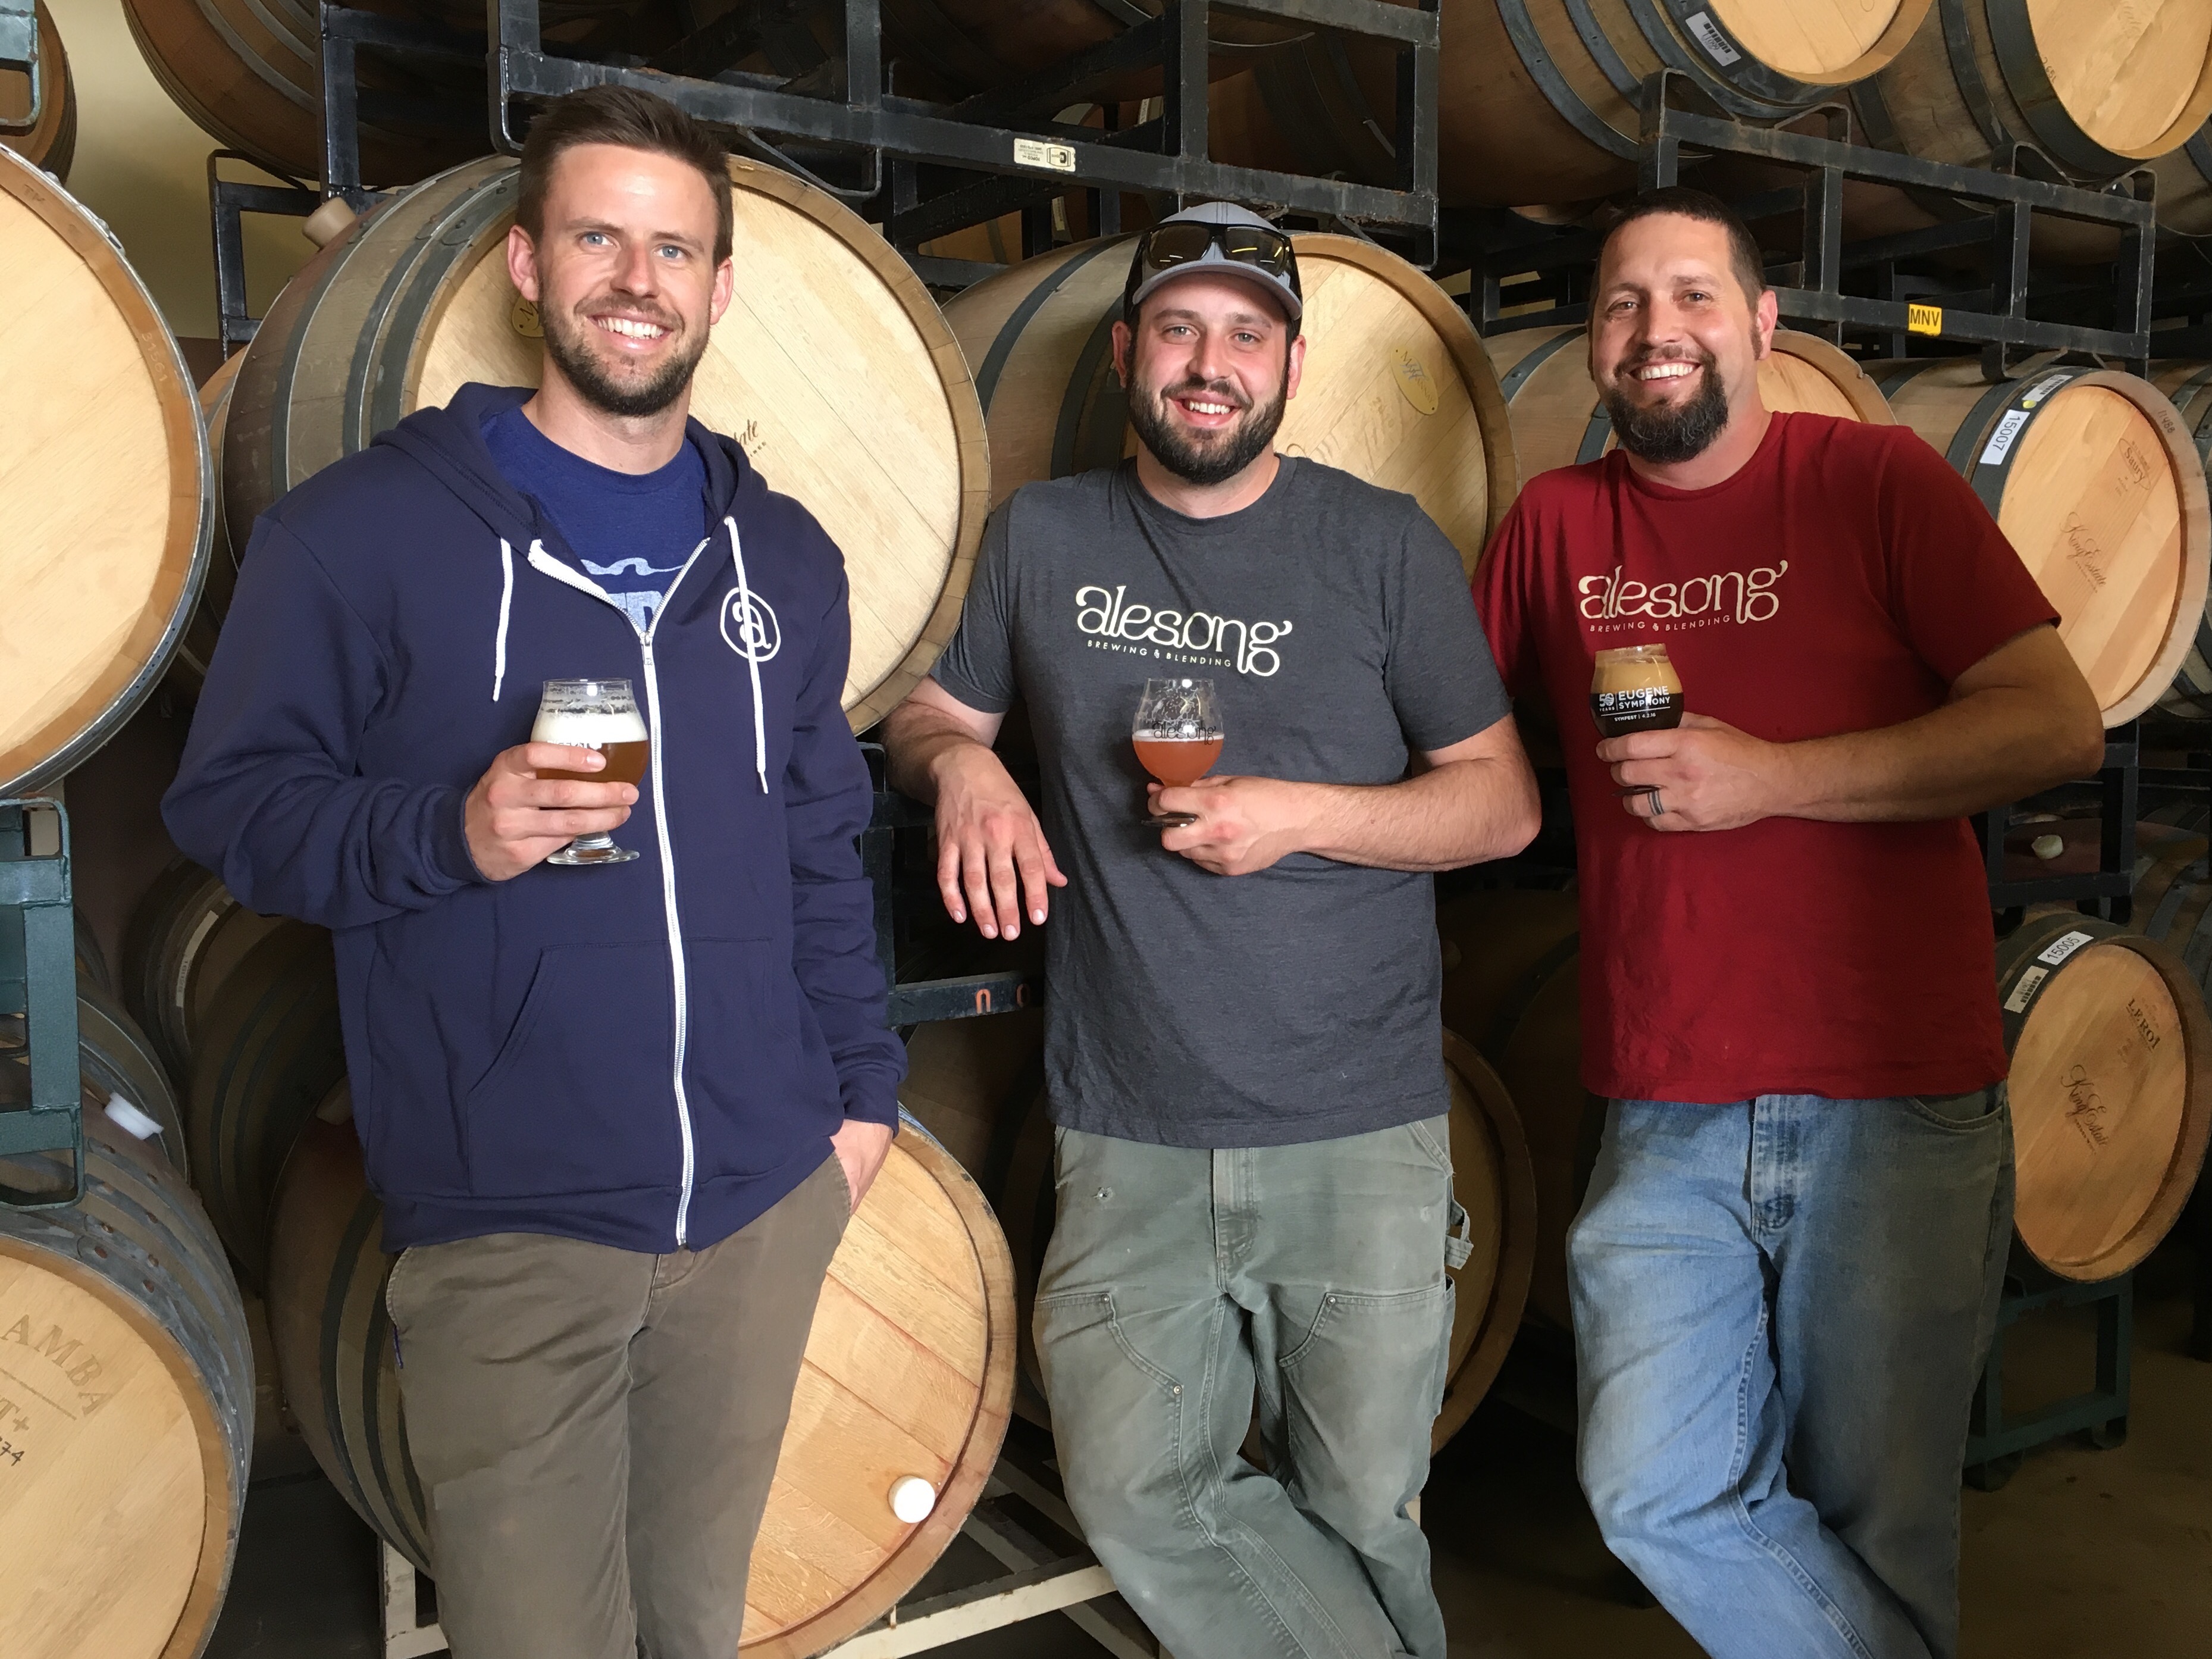 Alesong Brewing & Blending owners Doug Coombs, Brian Coombs and Matt Van Wyk. (photo by D.J. Paul)